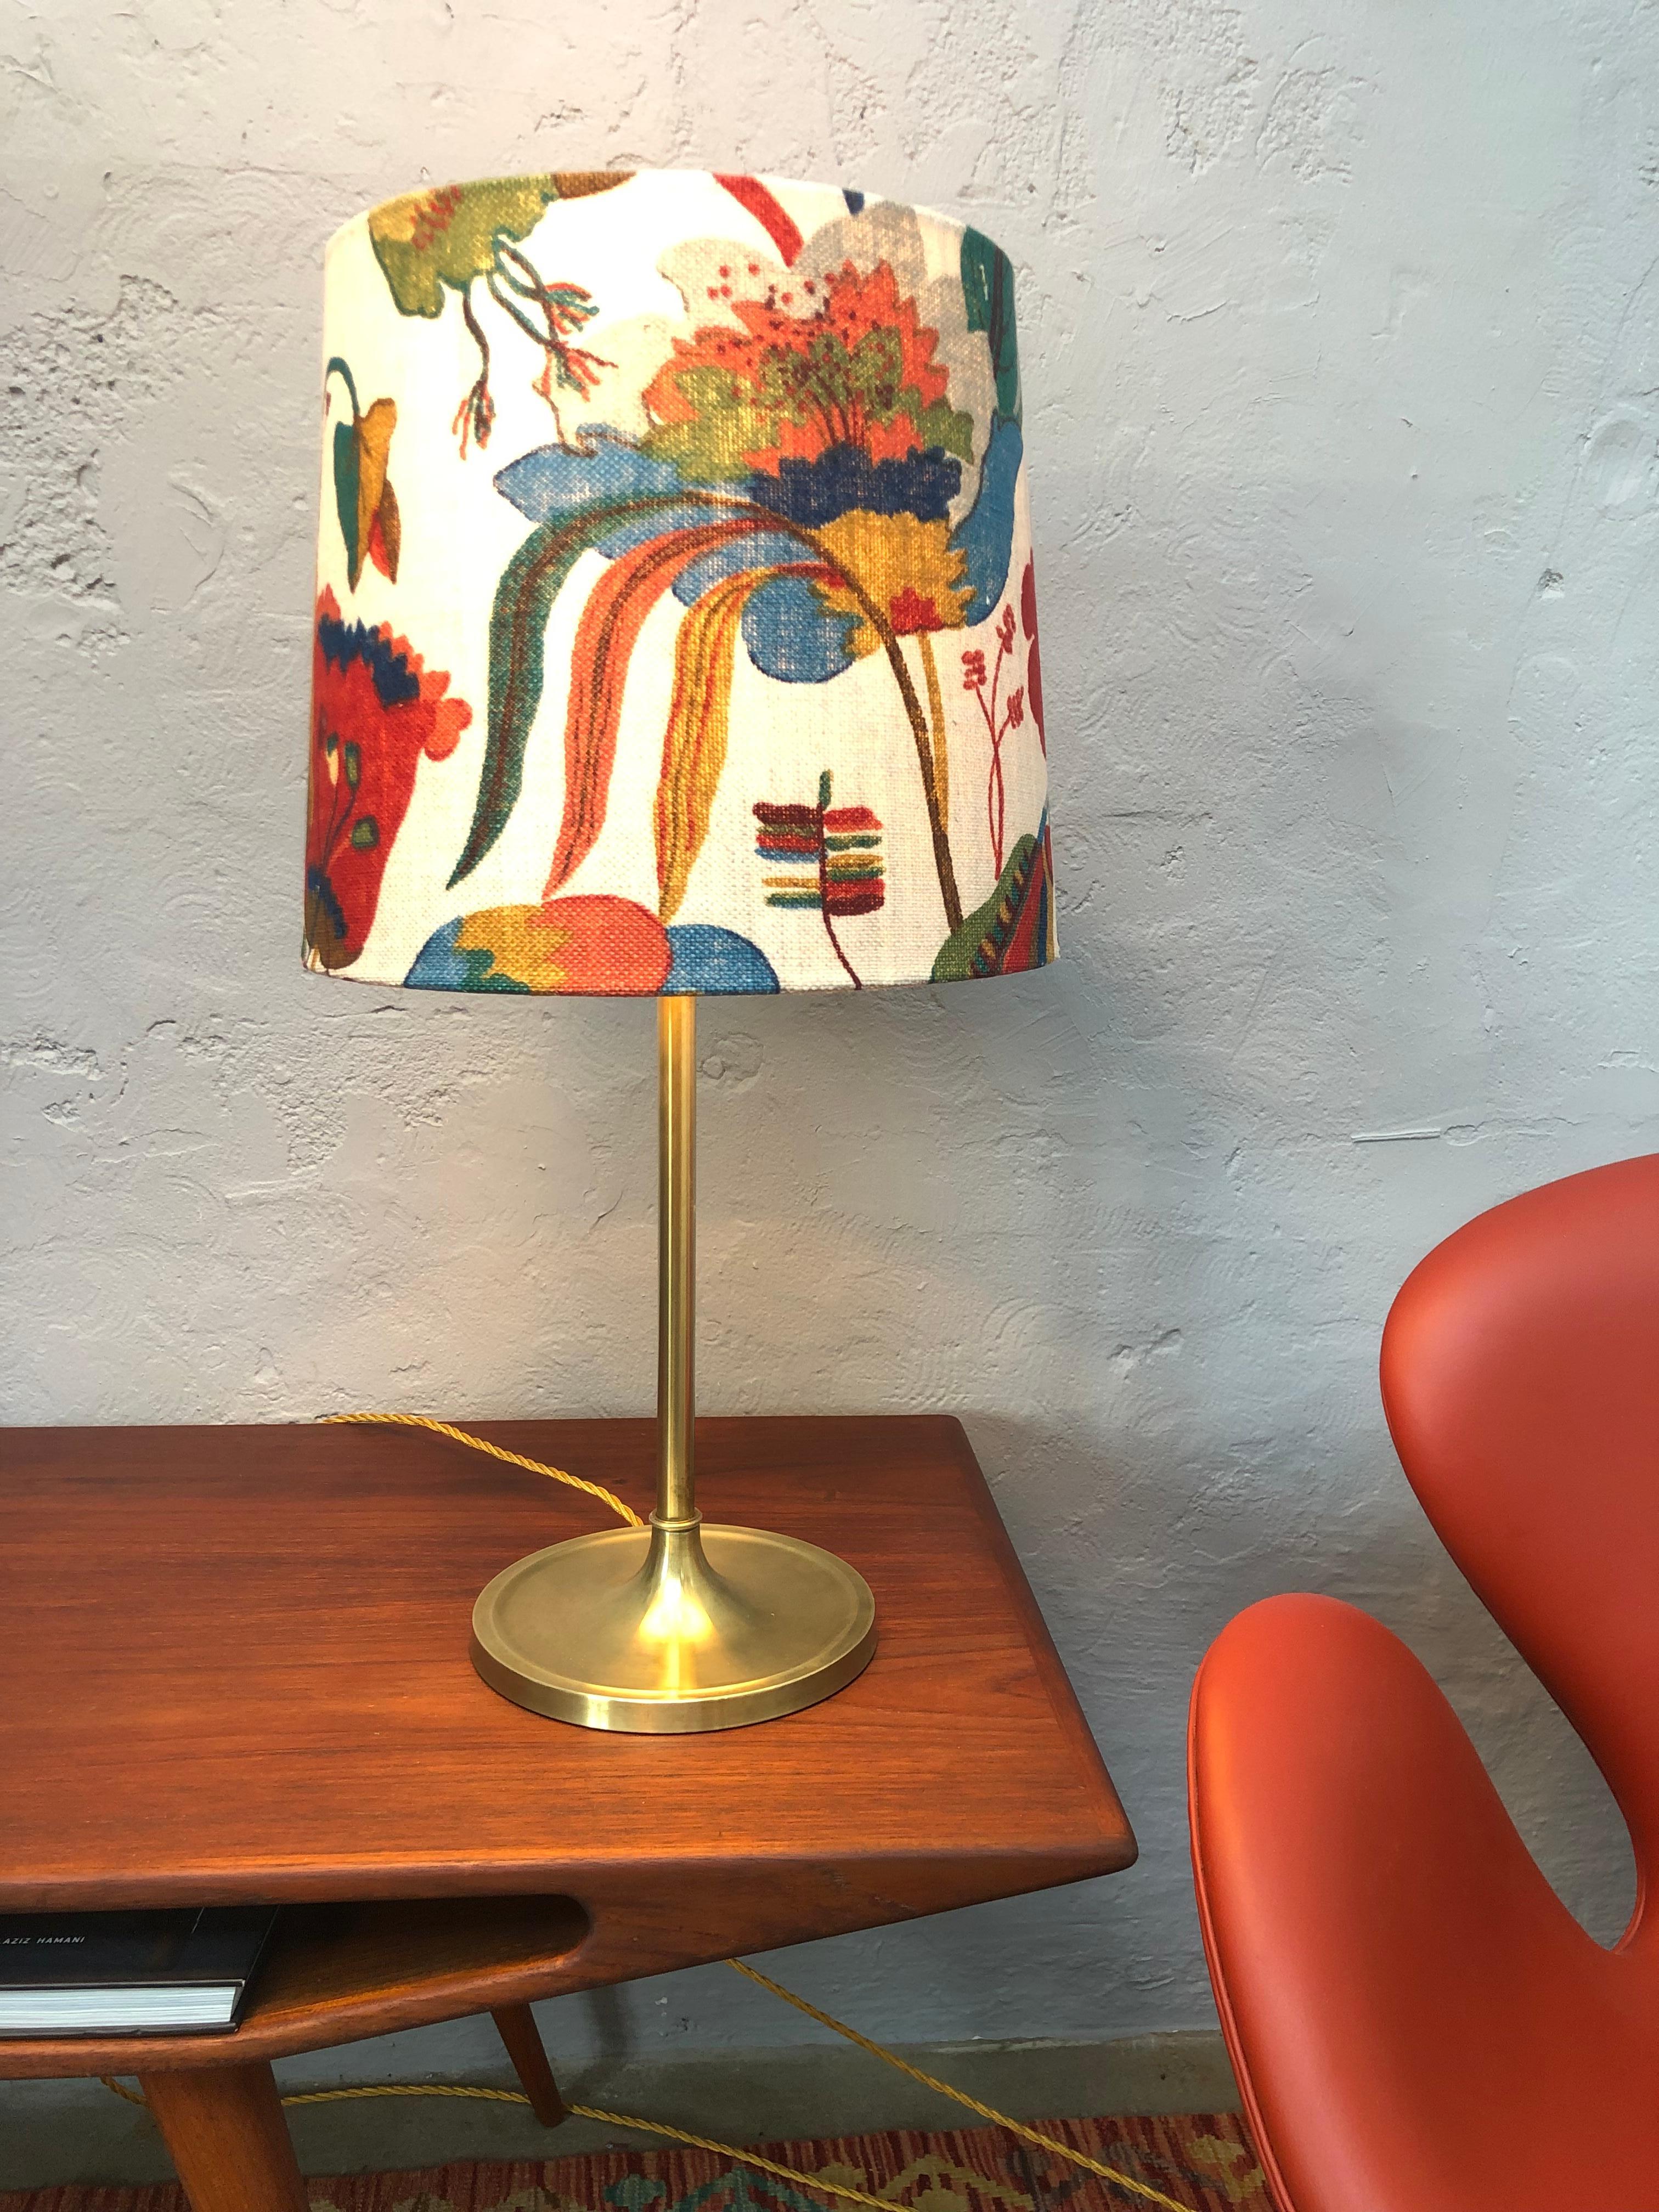 Mid-Century Modern Vintage Pair of Brass Table Lamps by Esben Klint for Le Klint from the 1950s For Sale